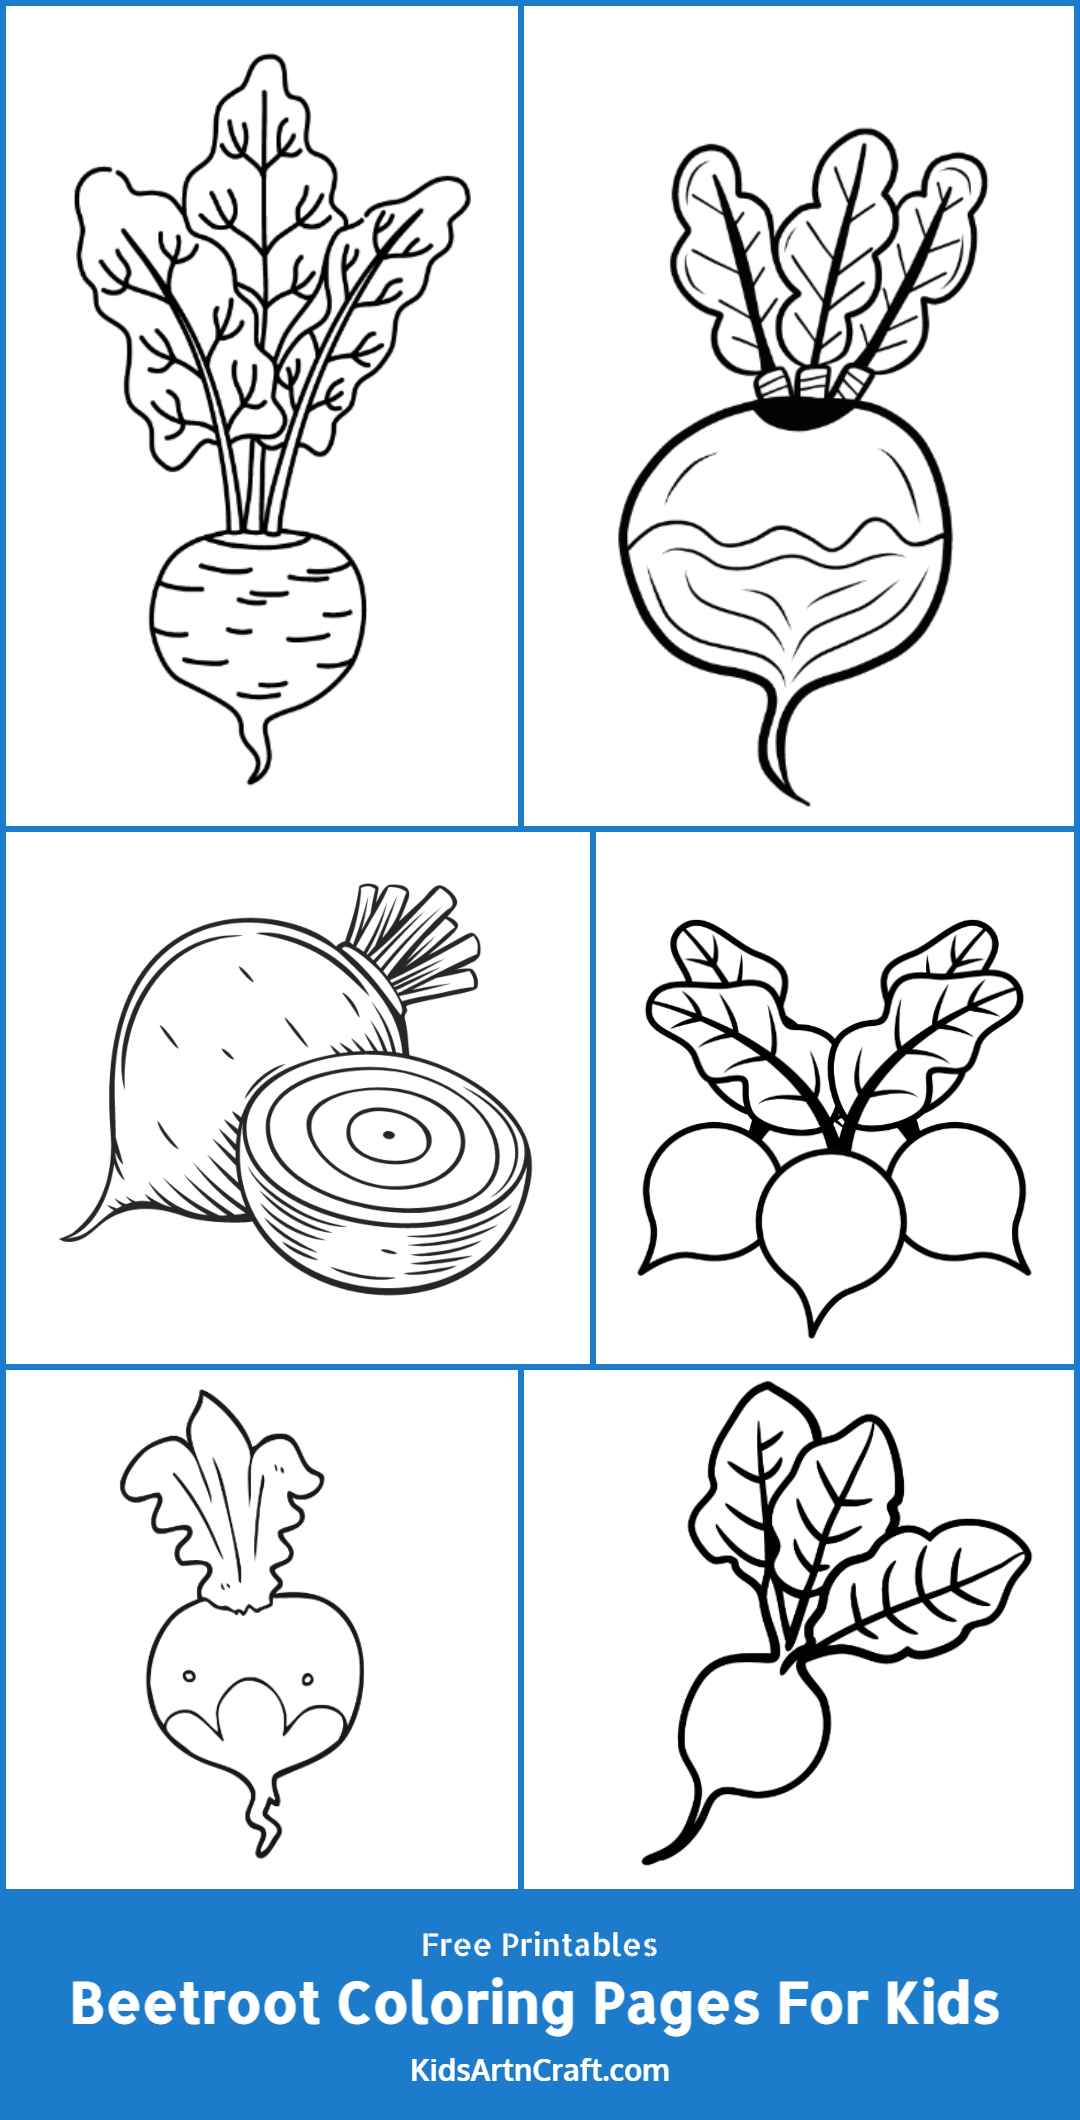 Beetroot Coloring Pages For Kids – Free Printables